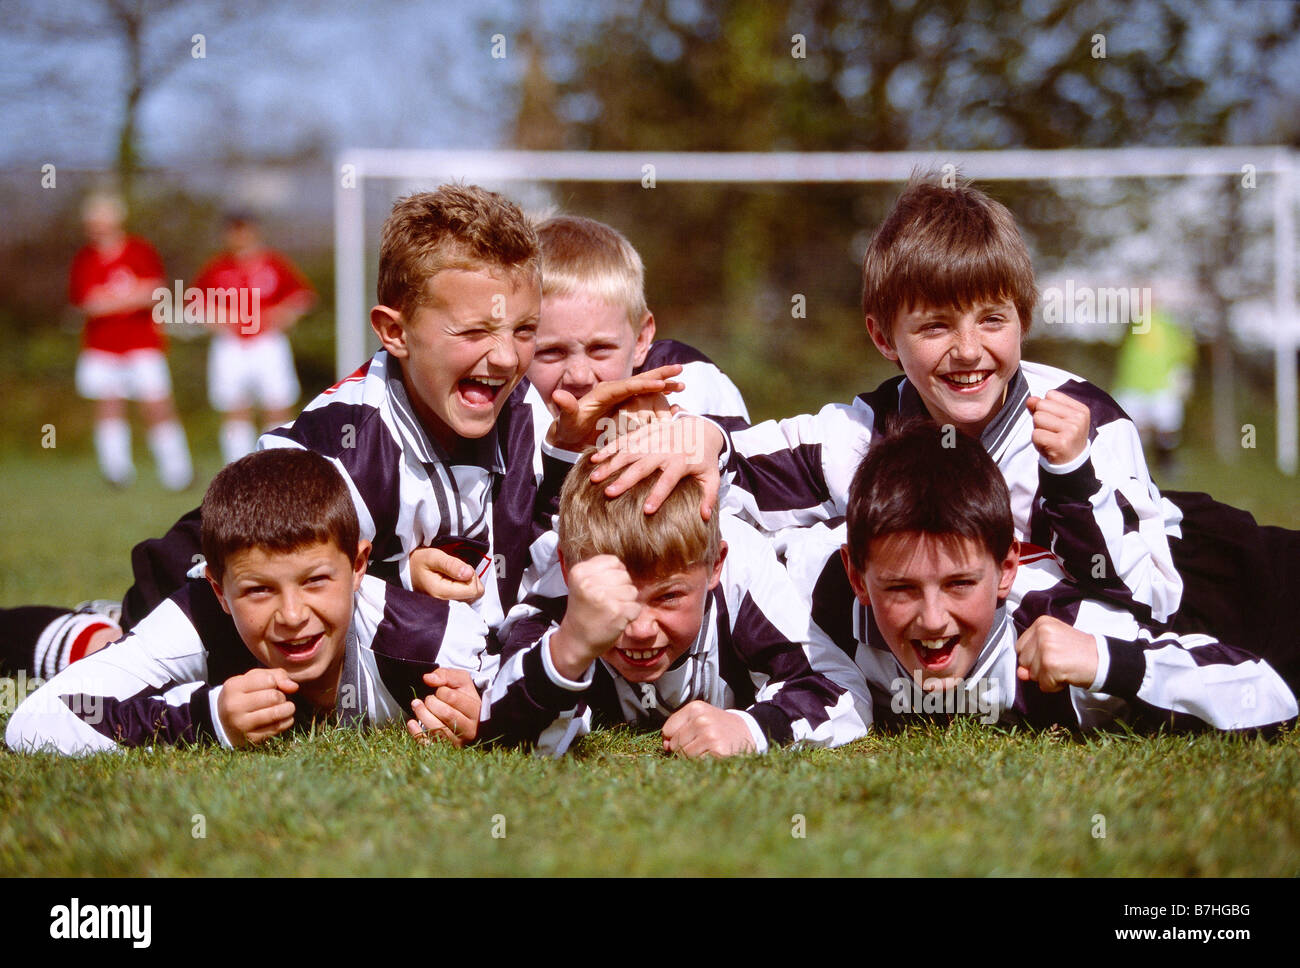 Children. Sport. Group of happy boys celebrating victory at end of Soccer game. Stock Photo